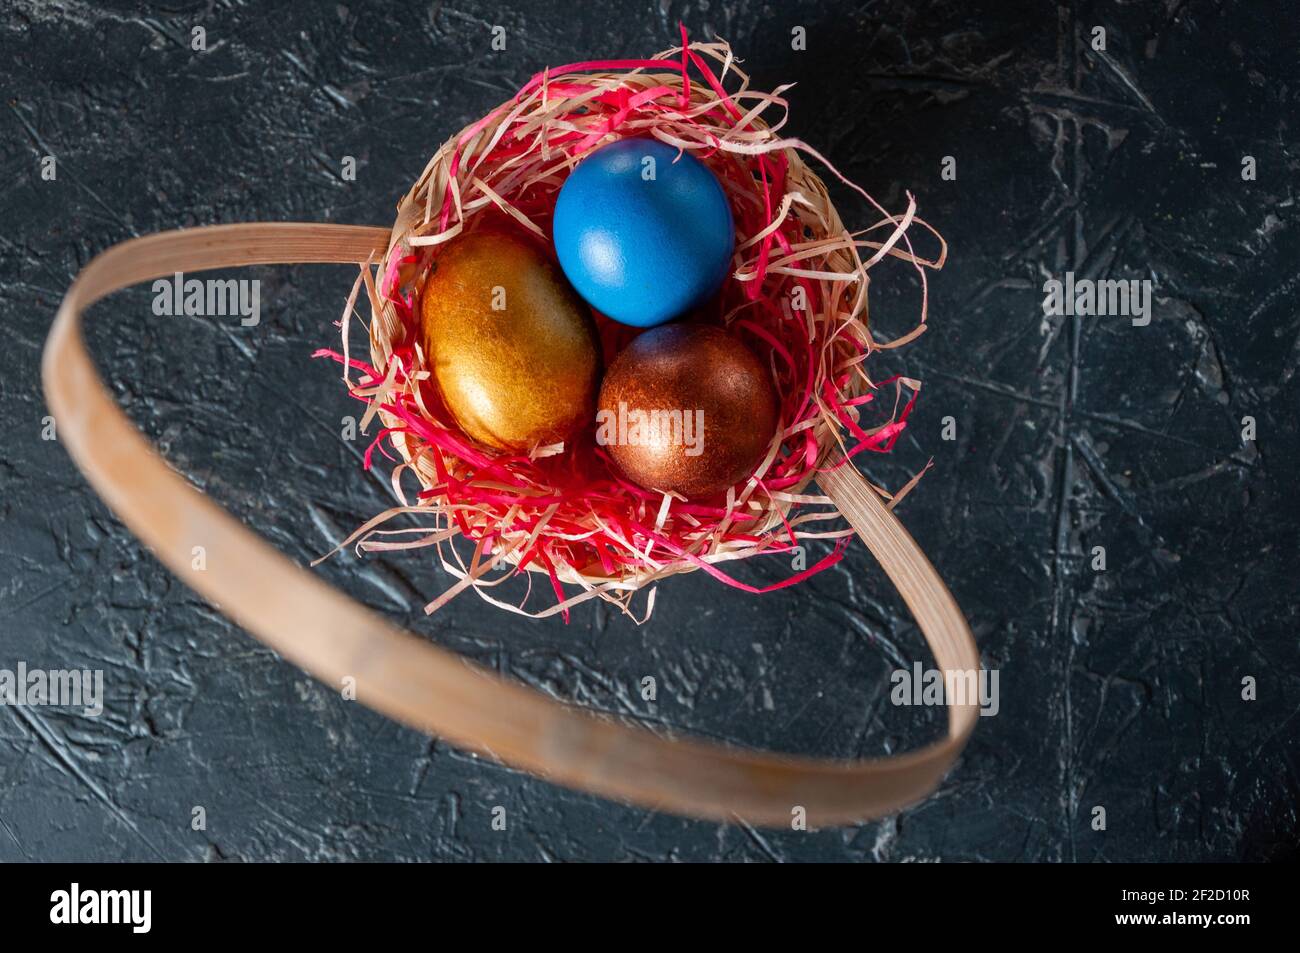 Homemade multicolored painted Easter eggs on colorful straw in a wicker basket on a dark background Stock Photo